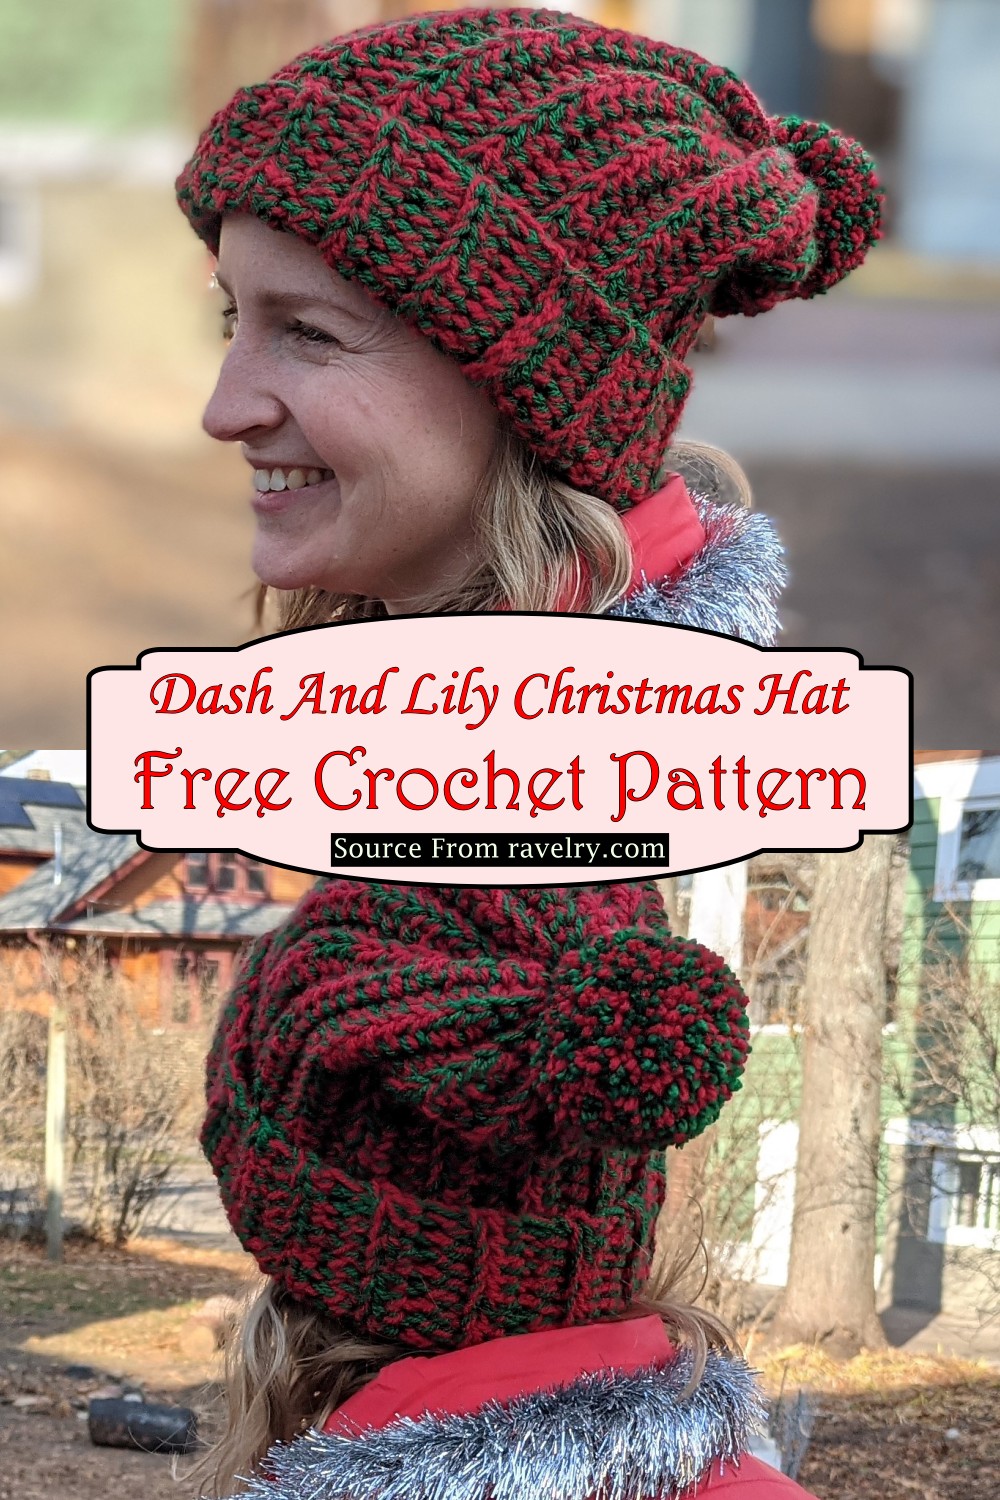 Crochet Dash And Lily Christmas Hat Pattern